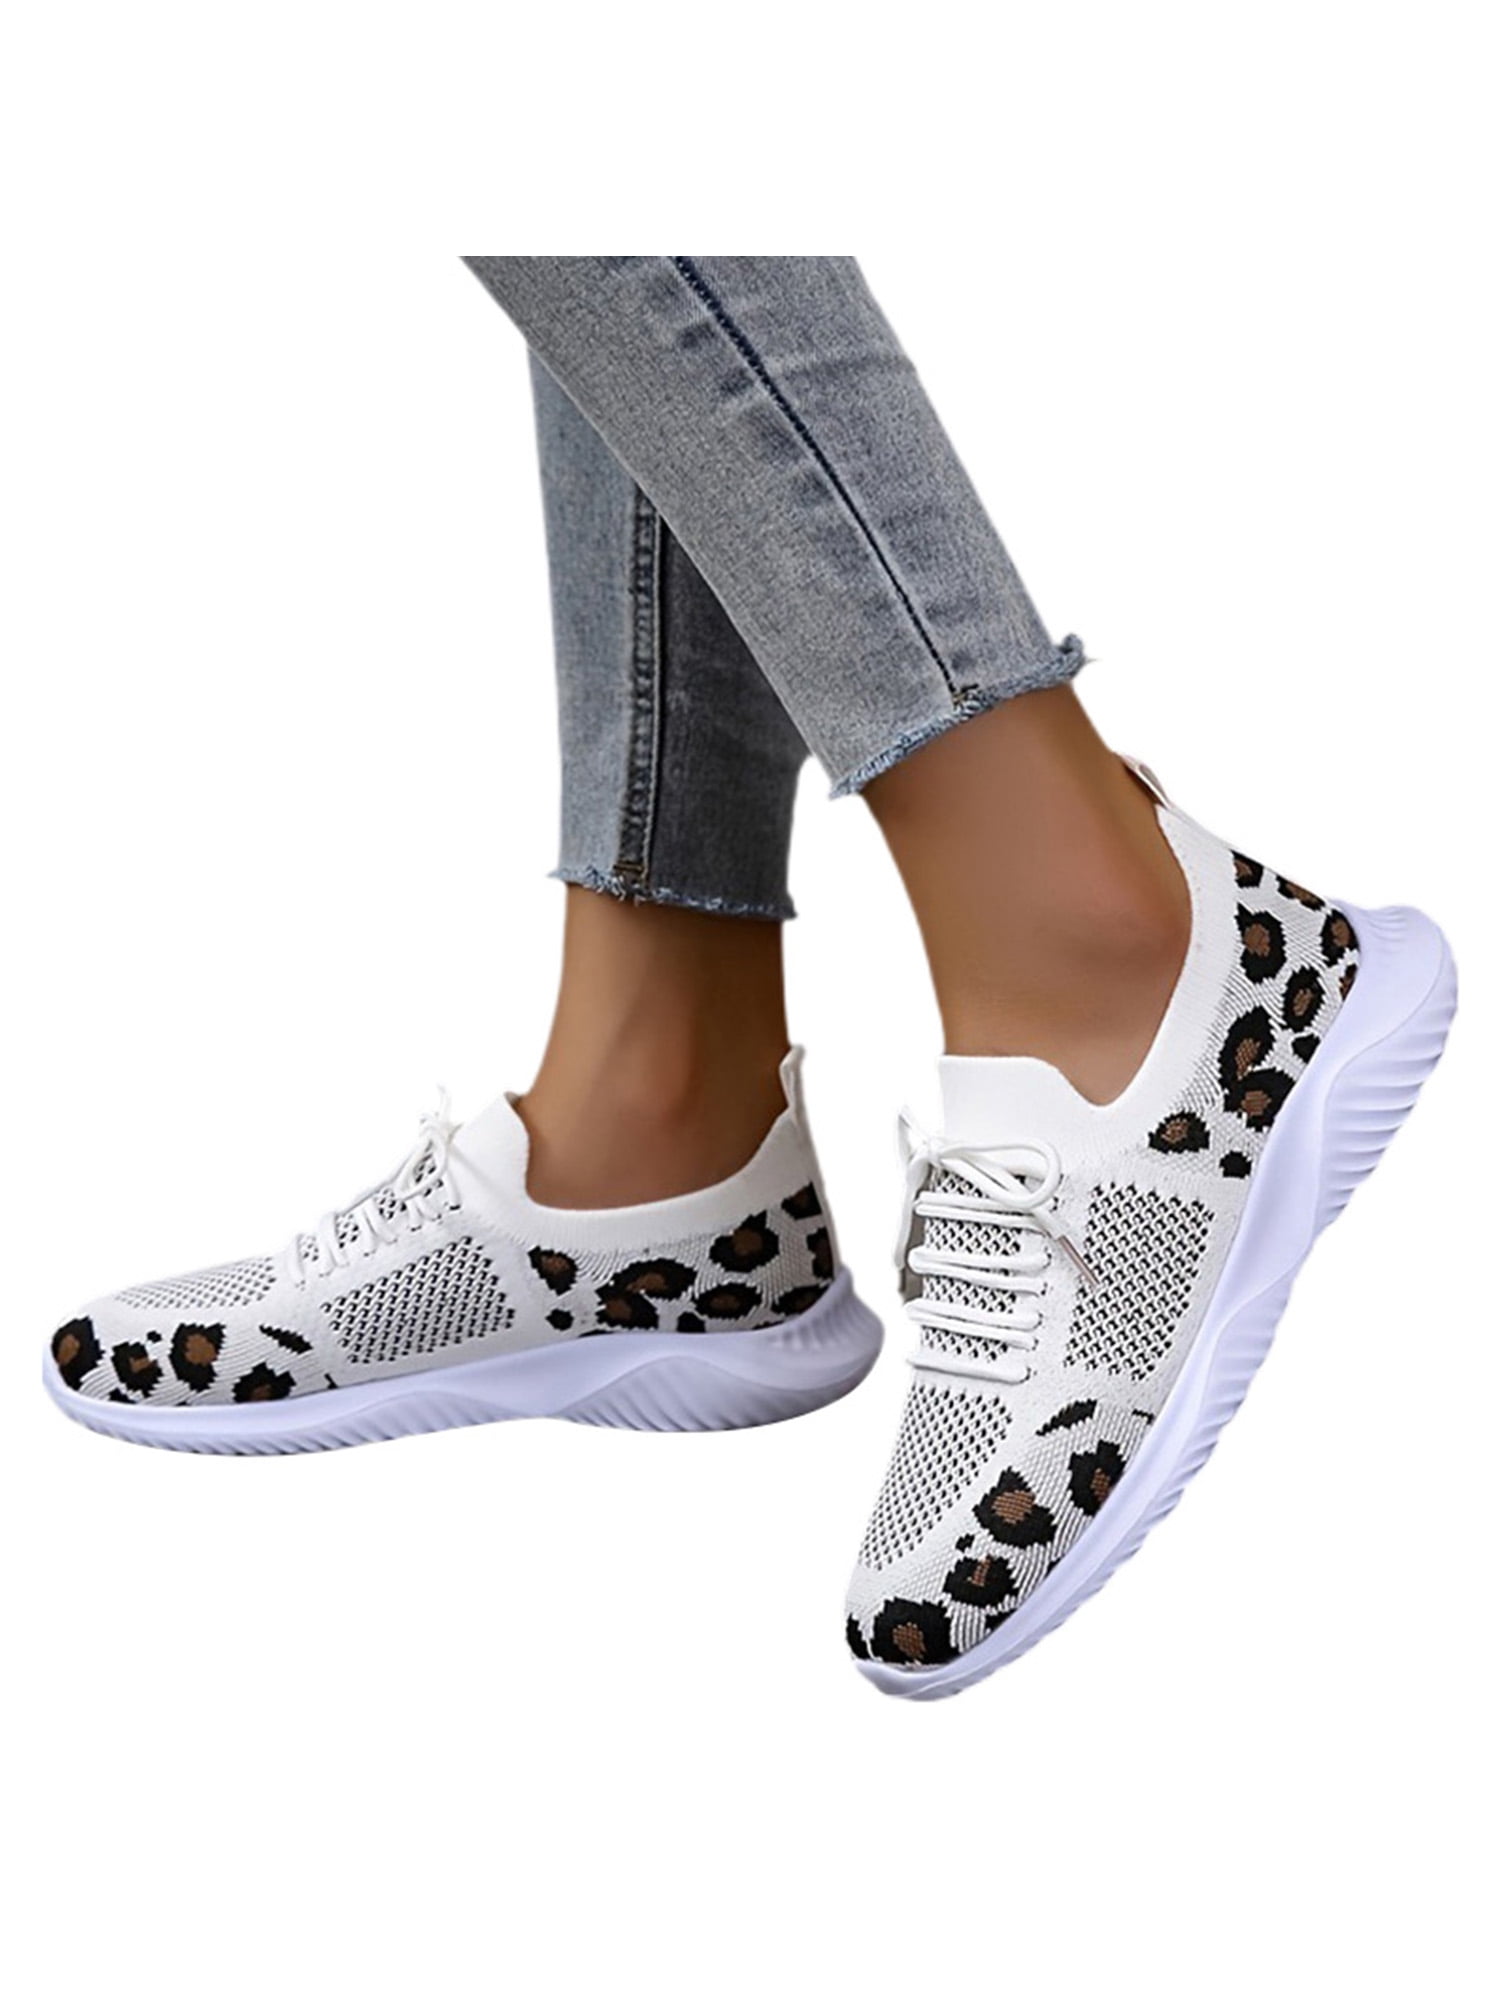 SIMANLAN Womens Athletic Shoes Breathable Trainers Fitness Workout Sneakers Ladies Lightweight Walking Shoe Women Sport Flats Print 7.5 - Walmart.com